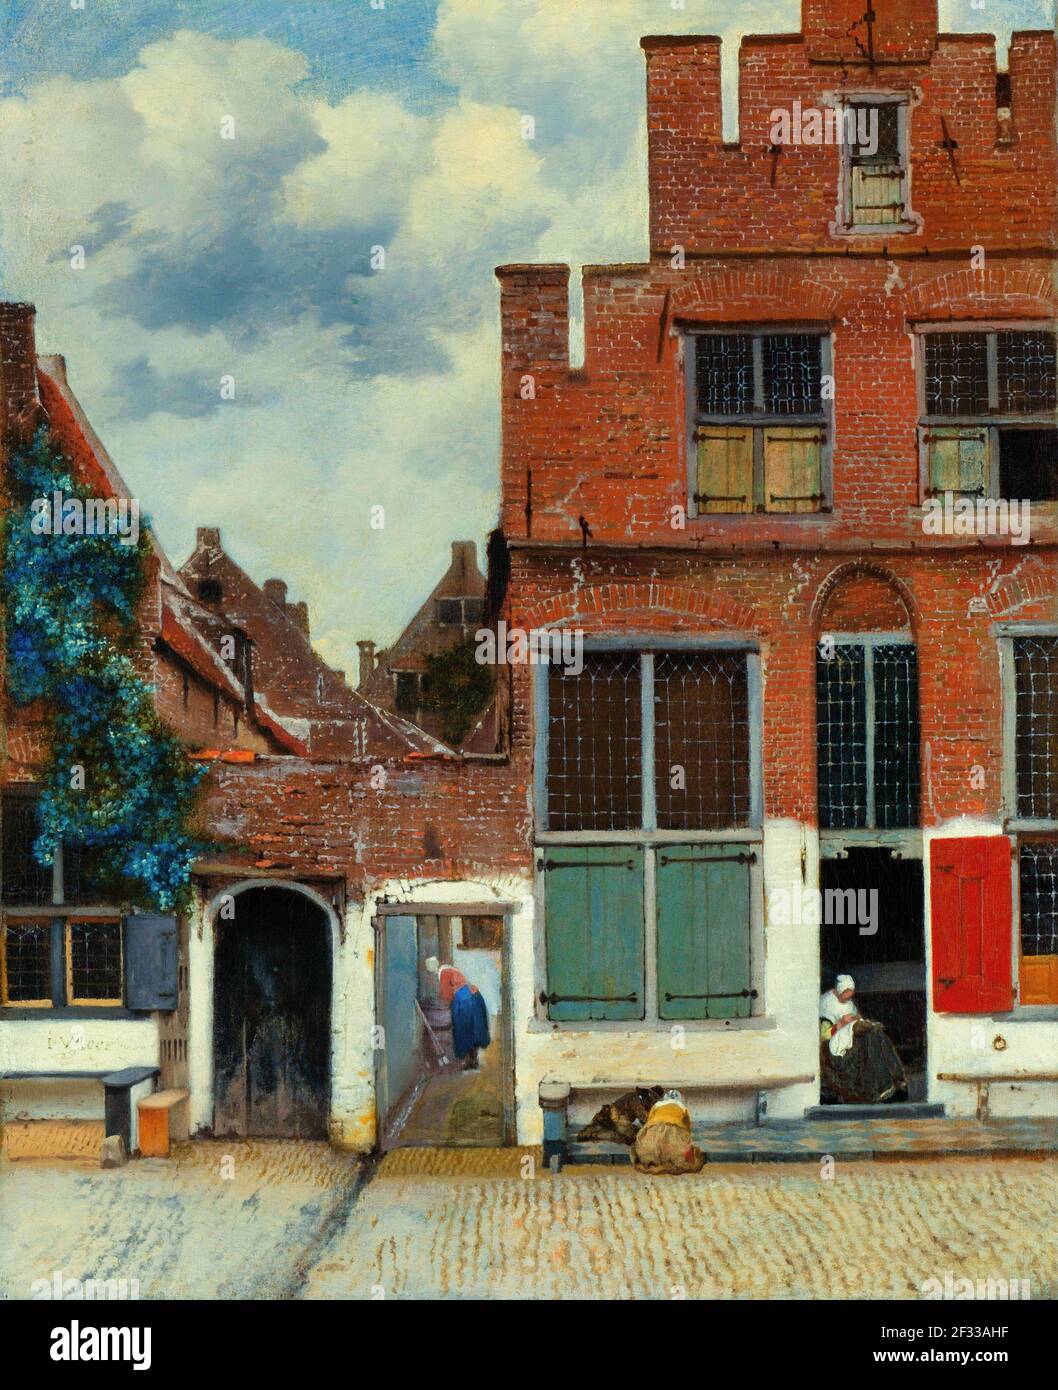 This is an unusual painting in Vermeer’s oeuvre, and remarkable for its time as a portrait of ordinary houses. The composition is as exciting as it is Stock Photo